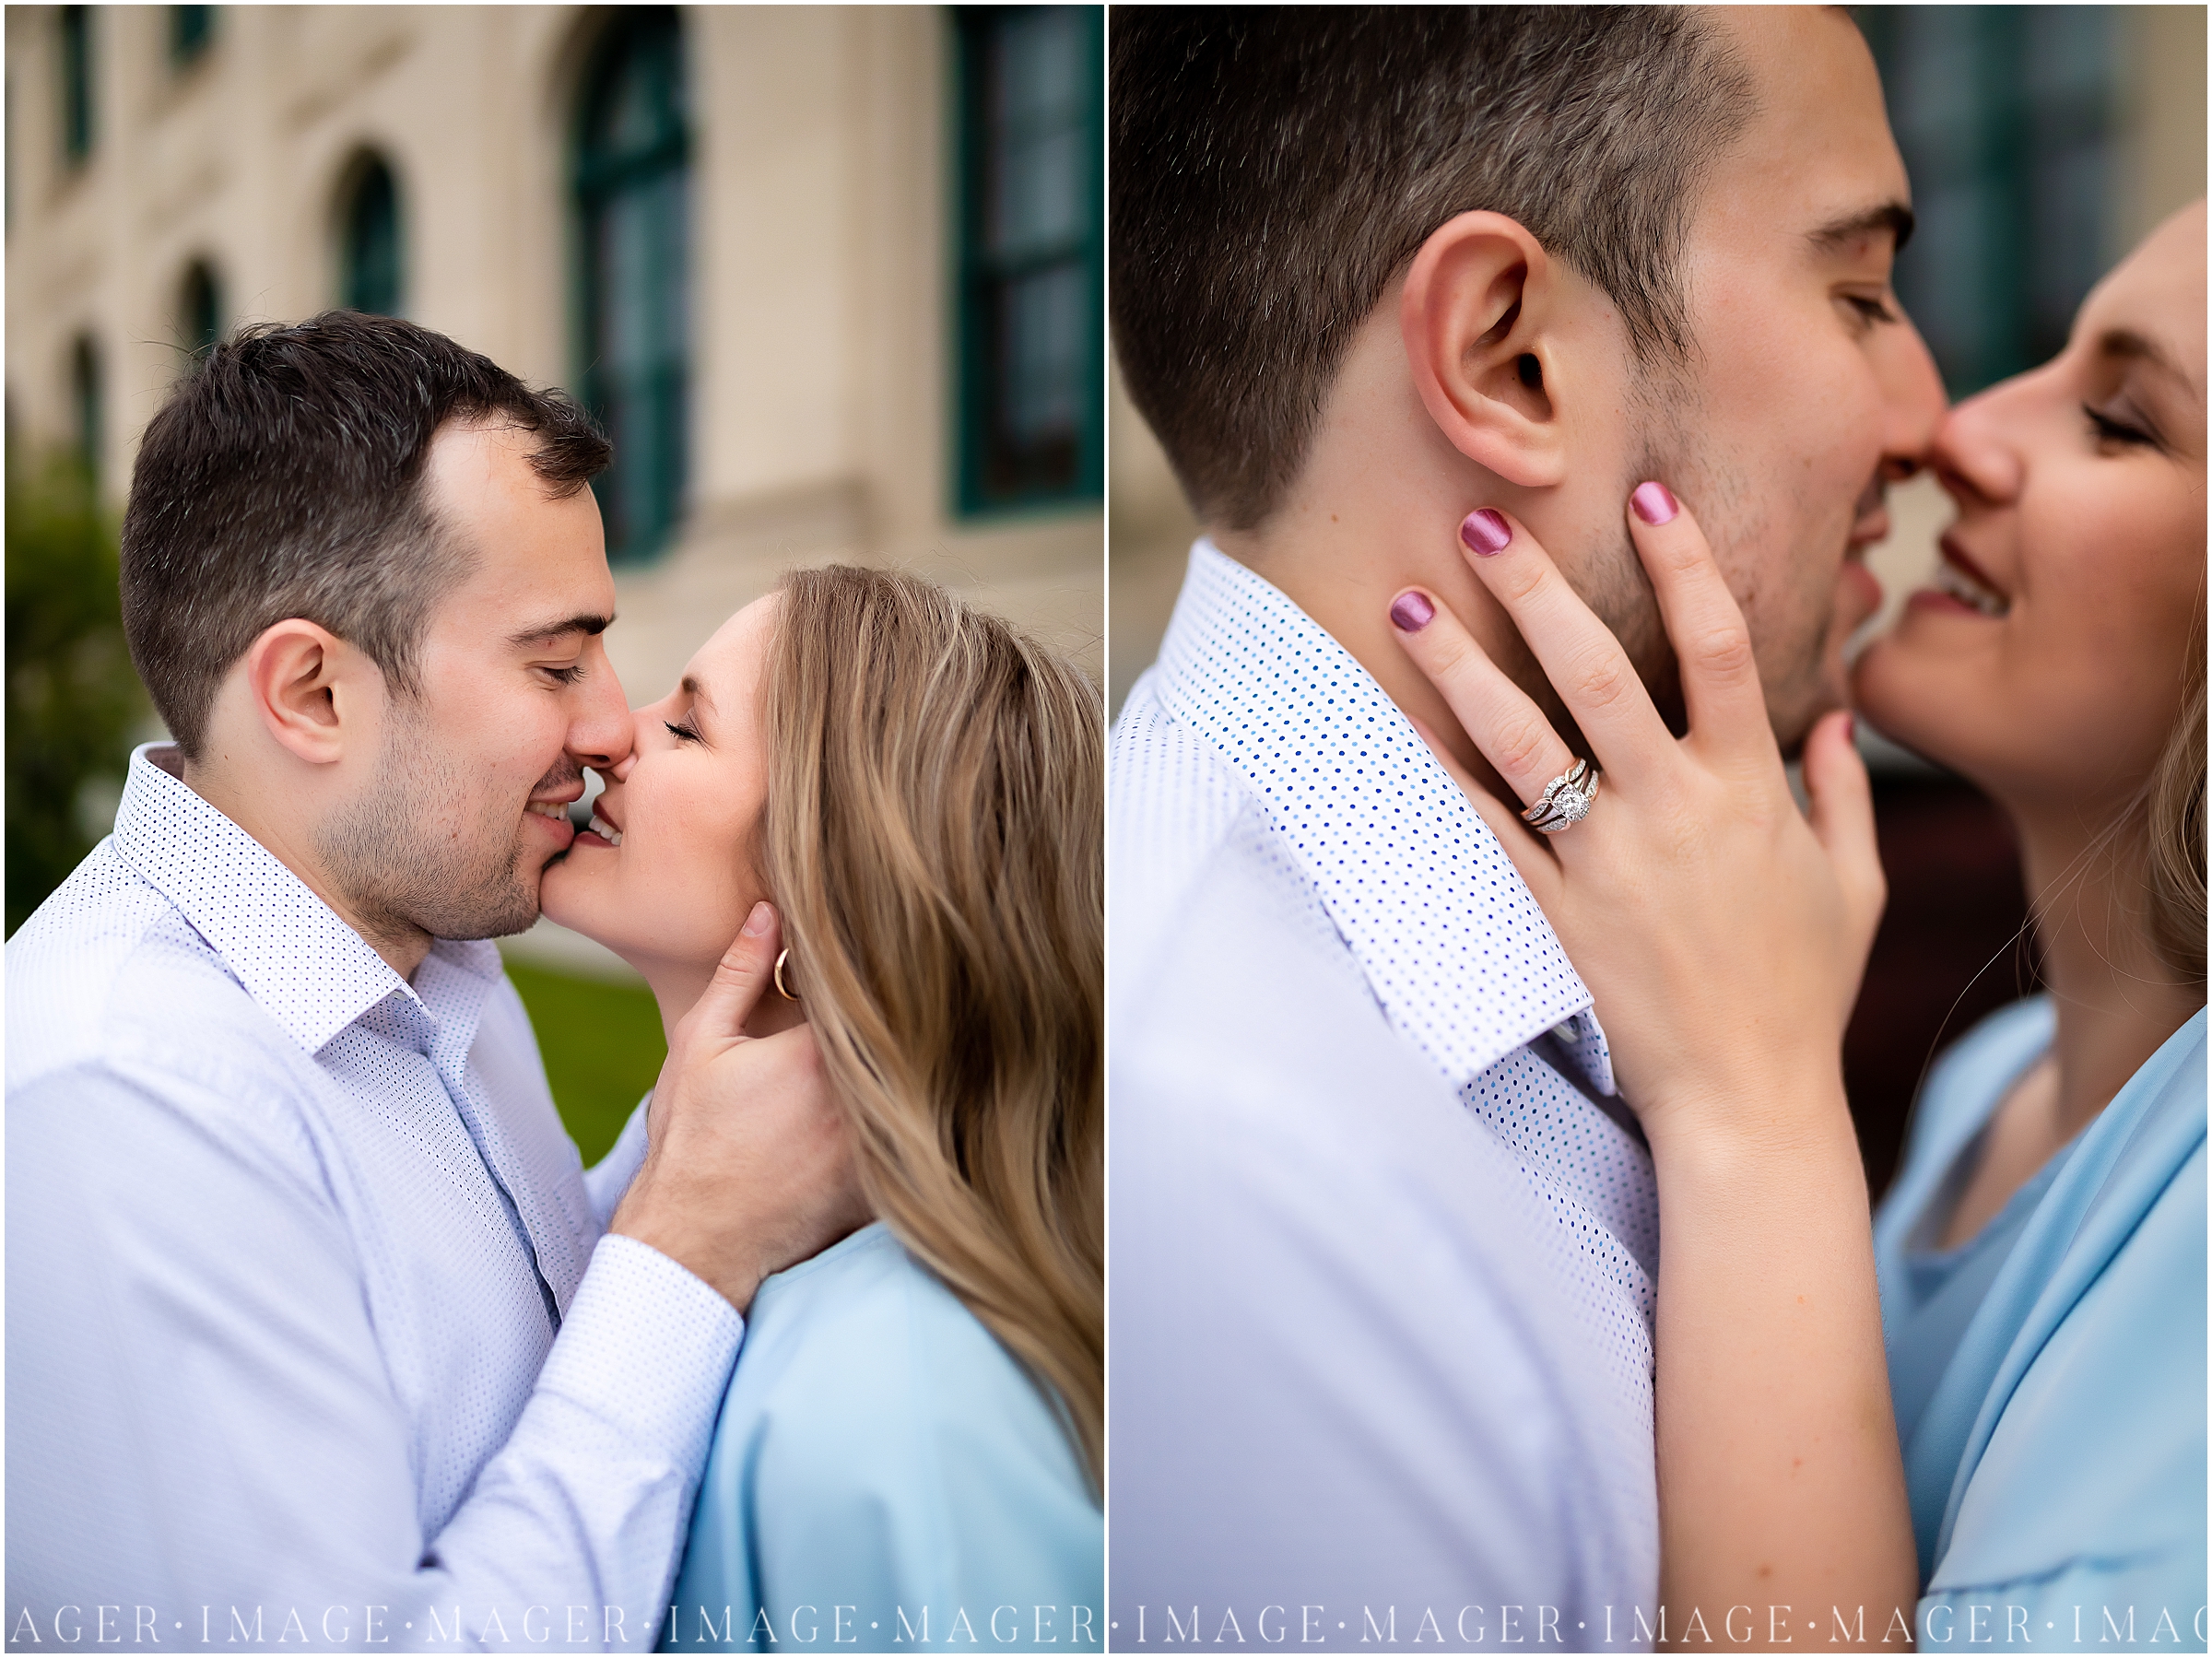 A collage of two images of a couple embracing each other, almost kissing, and smiling at their engagement session in downtown Danville, IL.

Photo taken by Mager Image Photography  